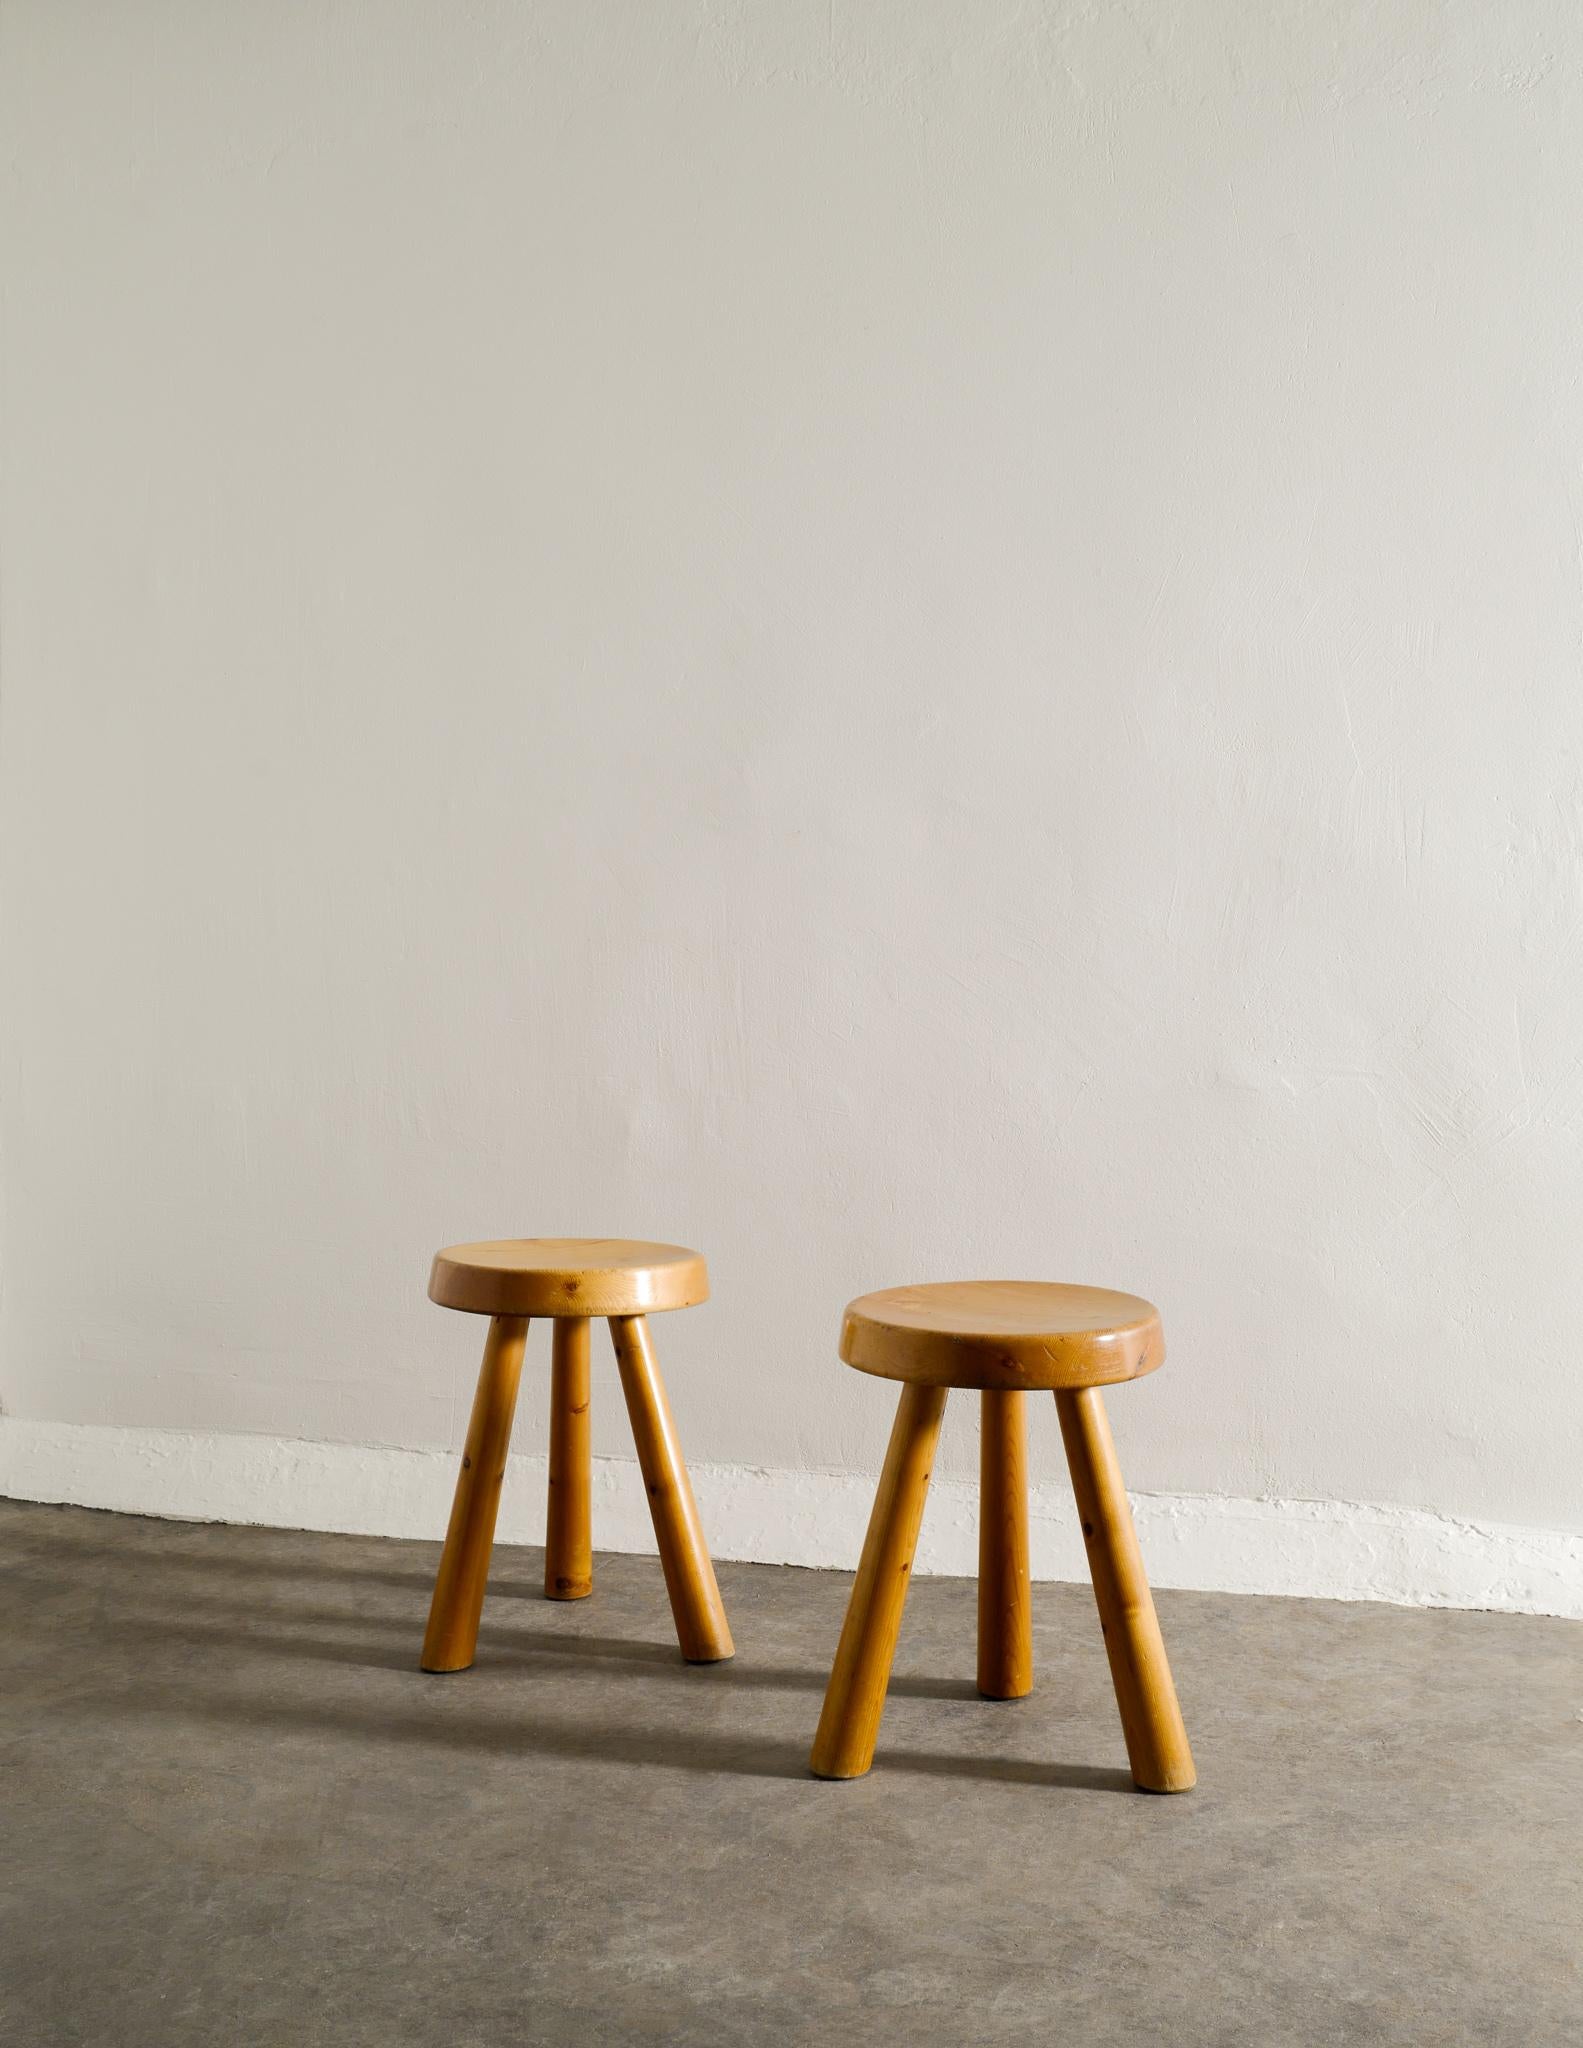 Mid-Century Modern Charlotte Perriand Pine Stools for Les Arcs Produced in France, 1960s